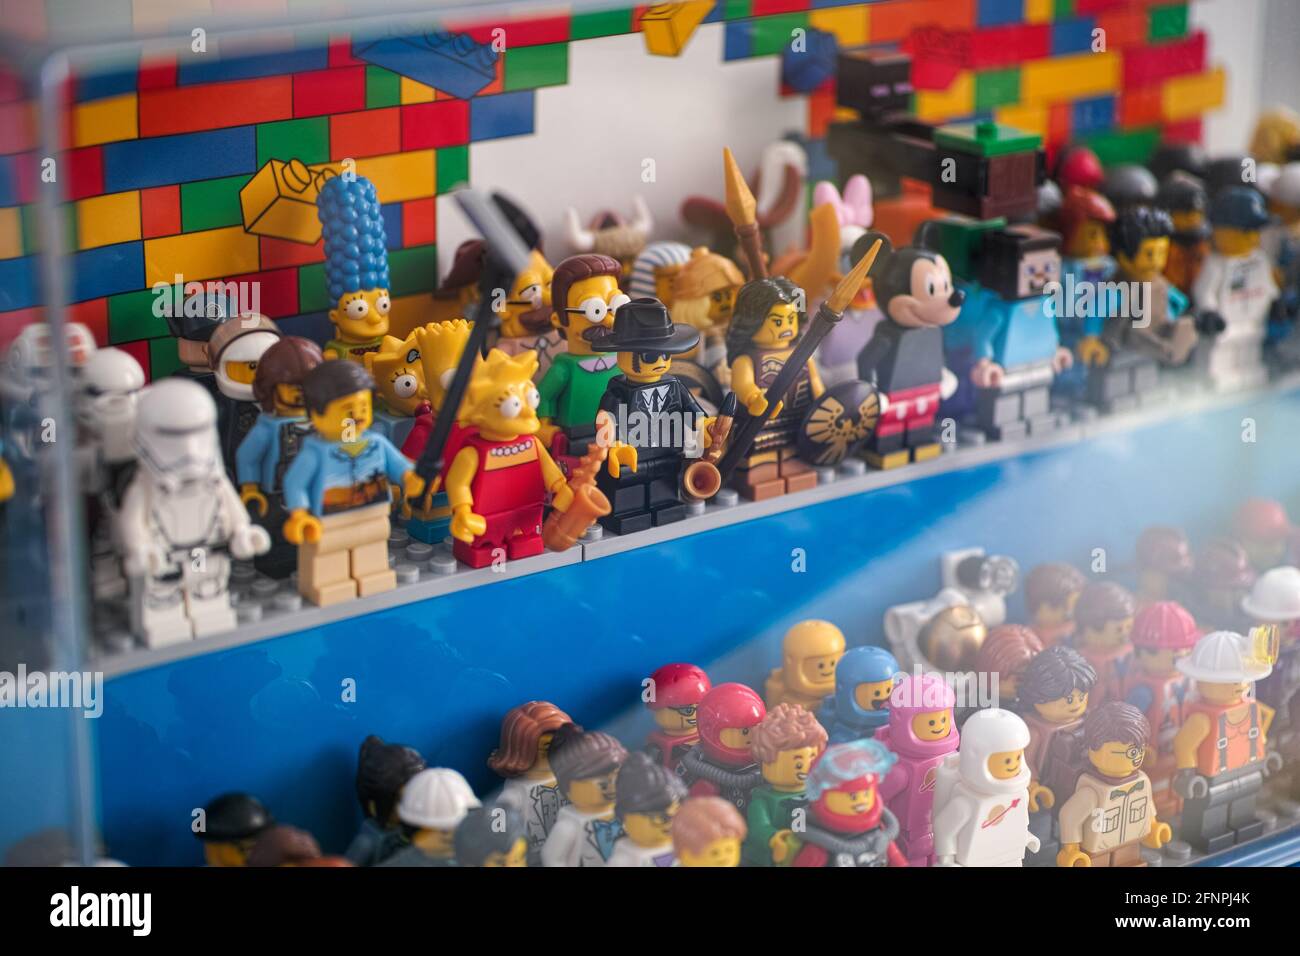 Tambov, Russian Federation - May 16, 2021 Lego minifigures standing in a display case. Shallow depth of field. Stock Photo